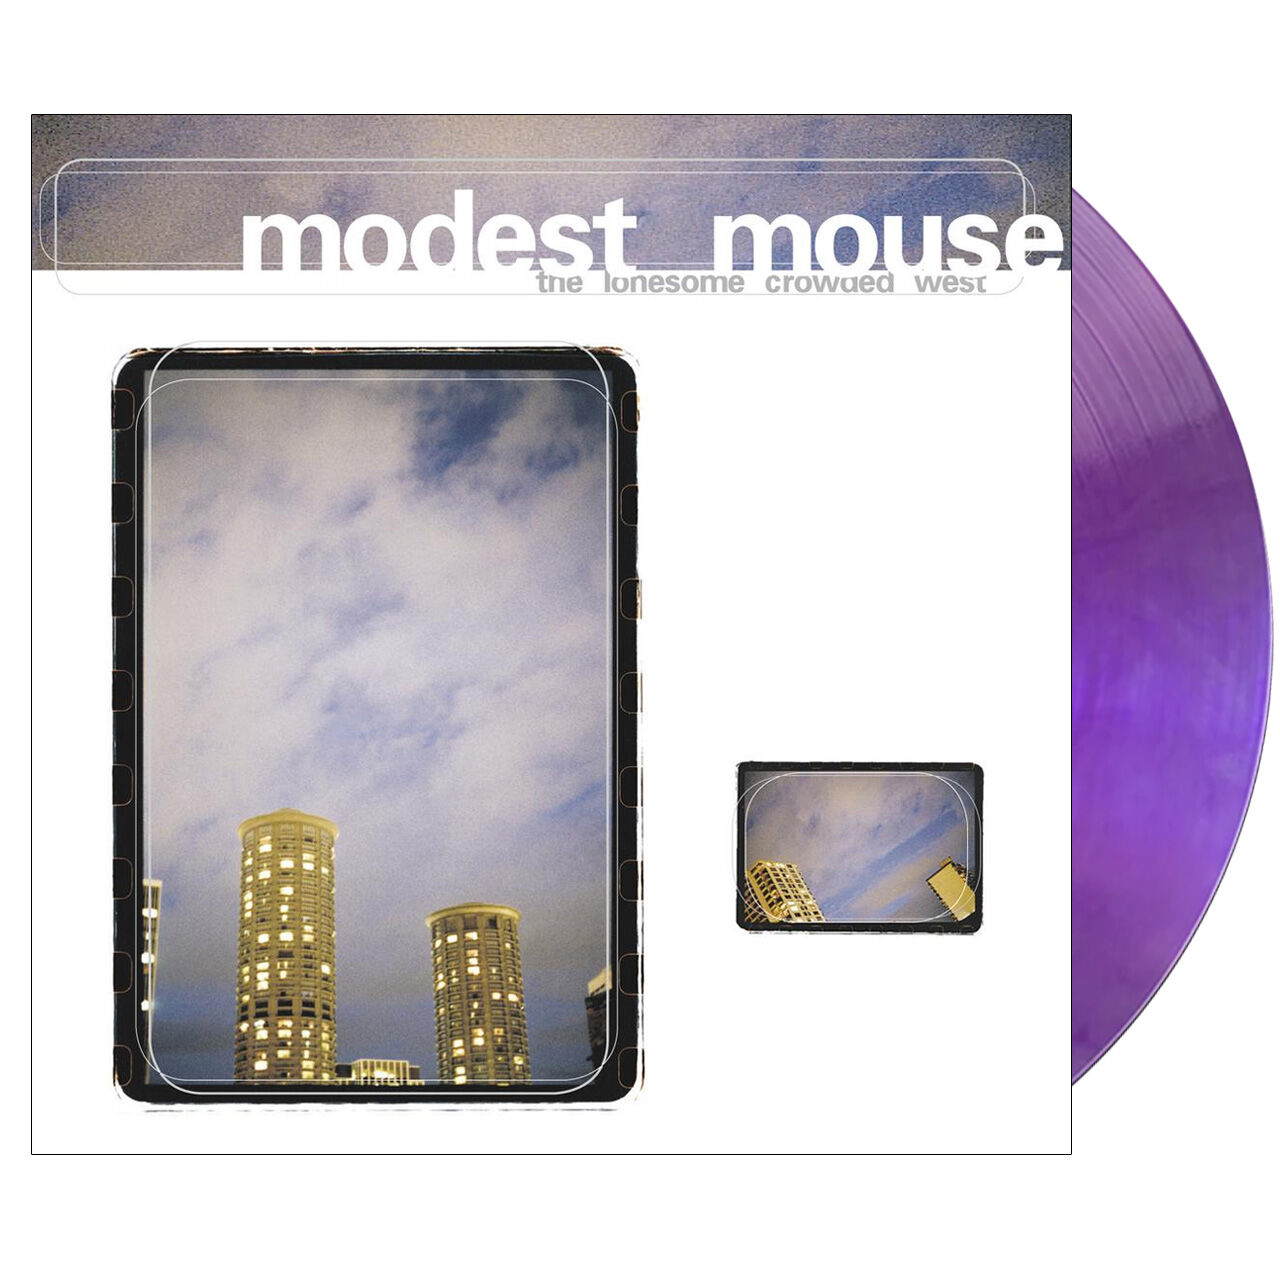 MODEST MOUSE The Lonesome Crowded West VMP Purple 2LP Vinyl